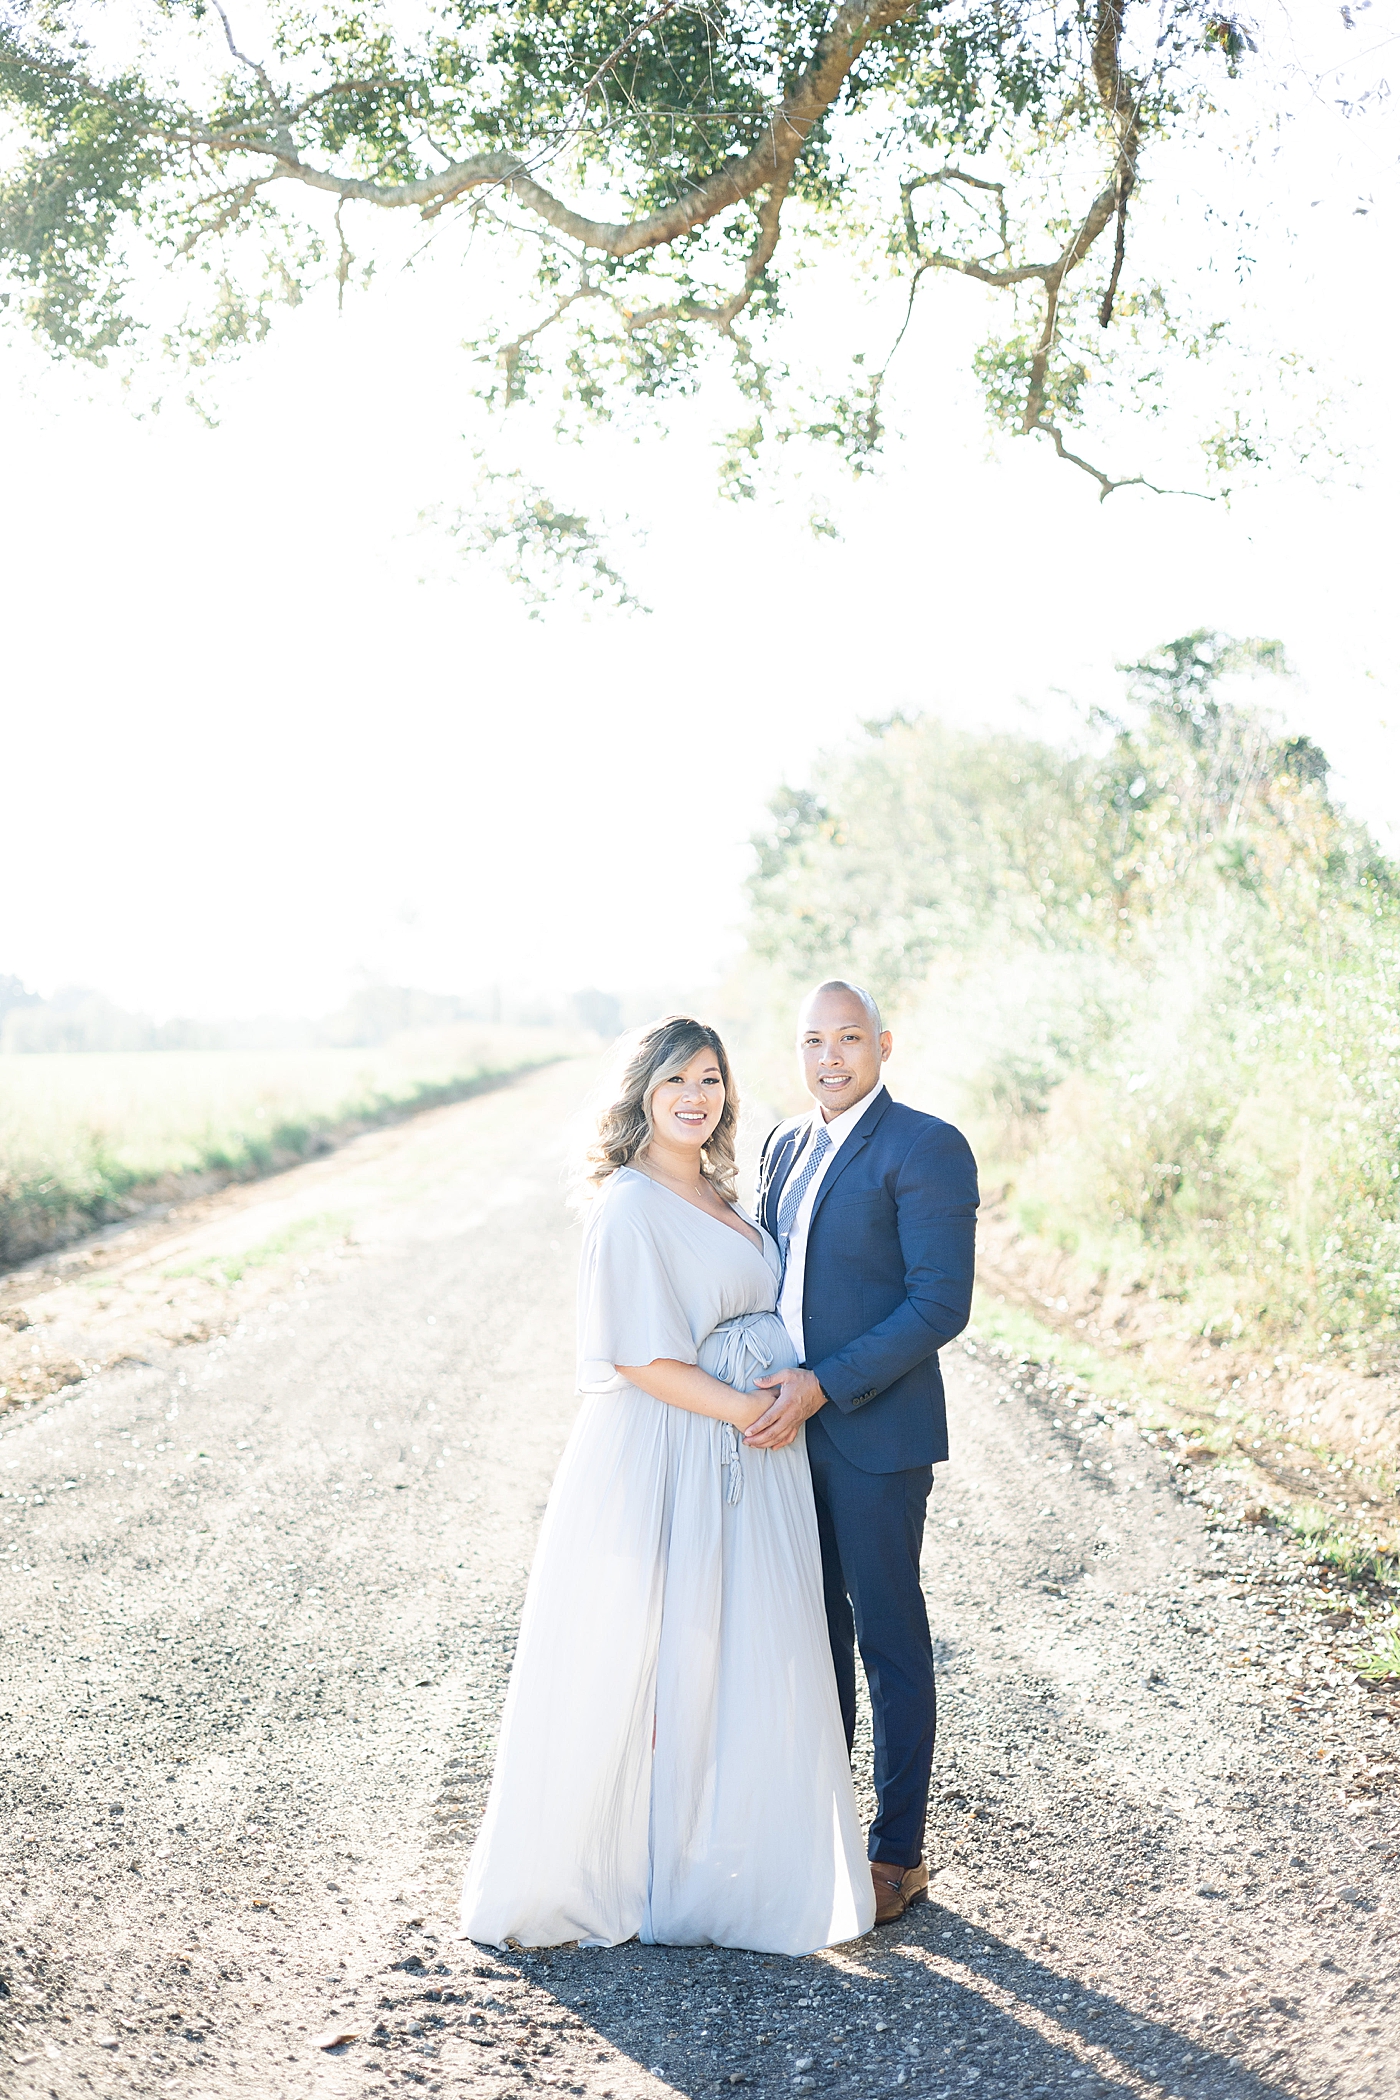 Mom and dad to be smiling together | Photo by Little Sunshine Photography 